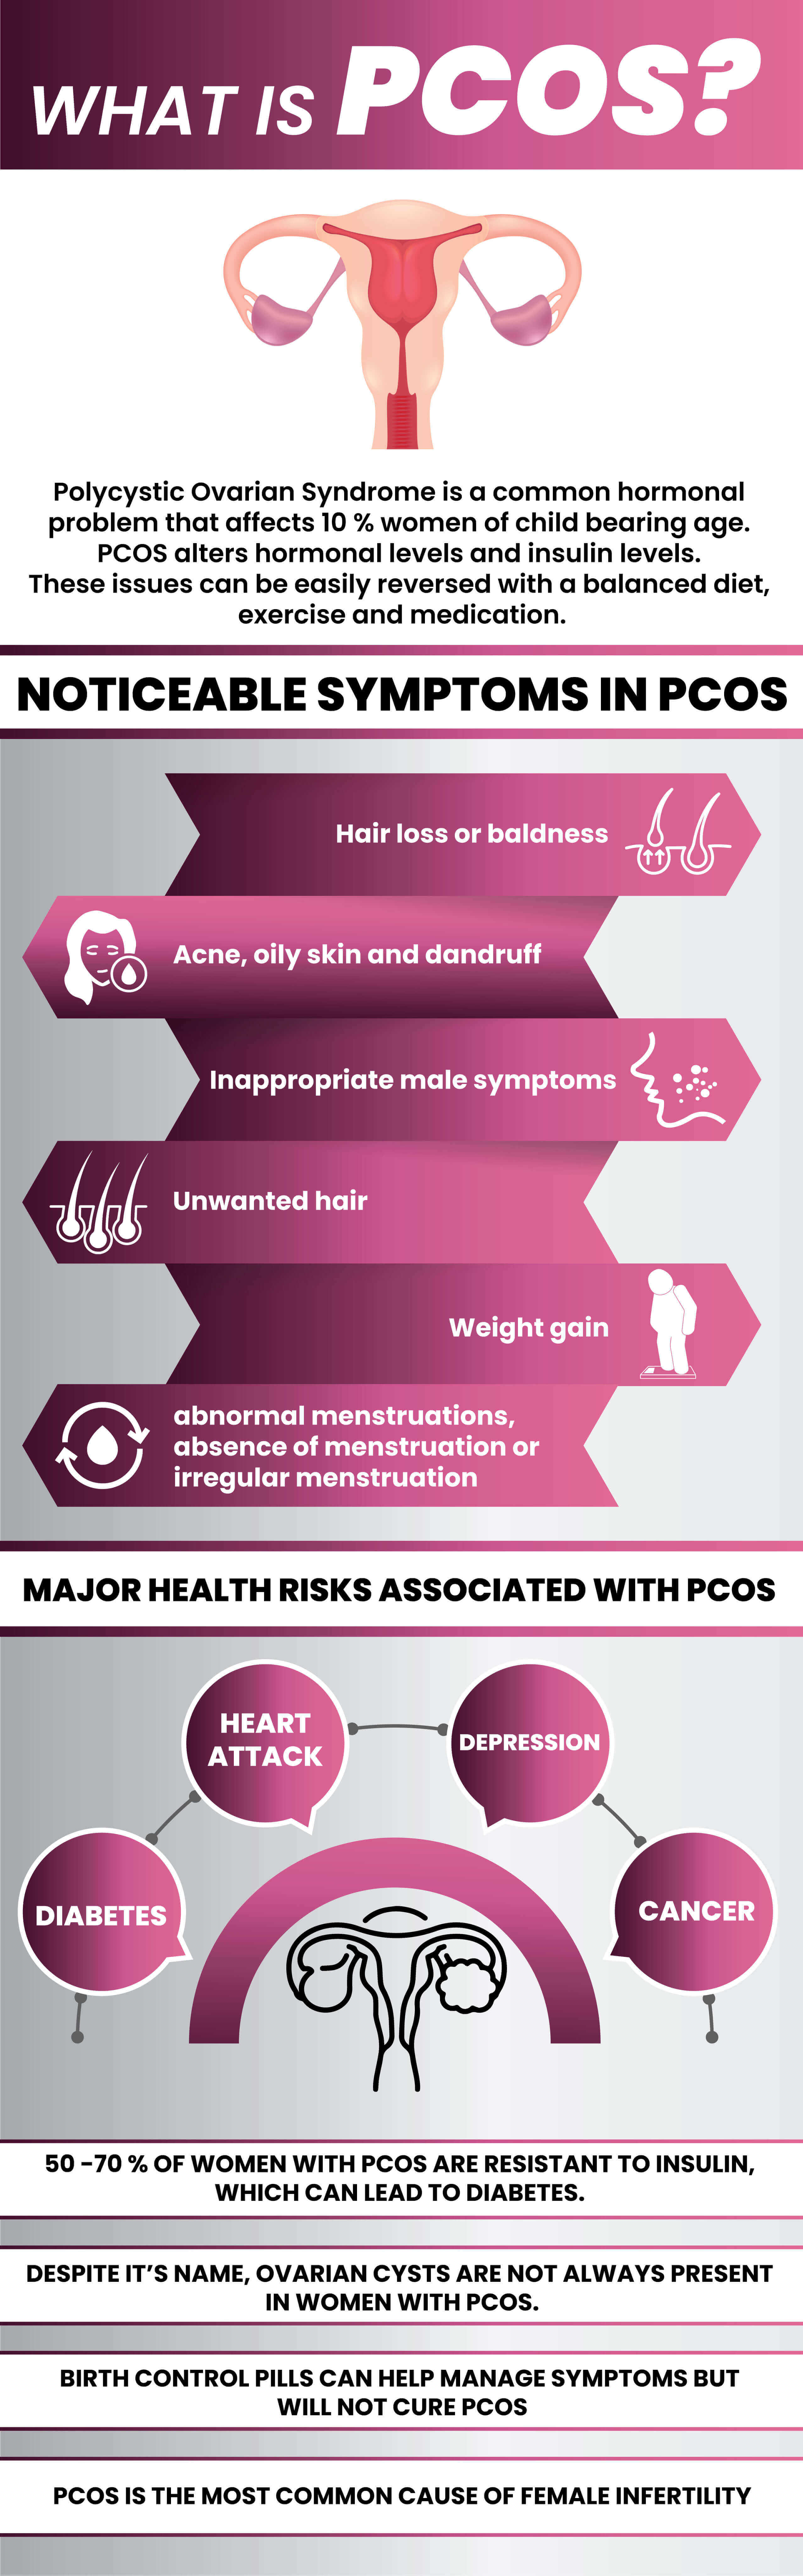 what is PCOS, symptoms and risk associated with PCOS